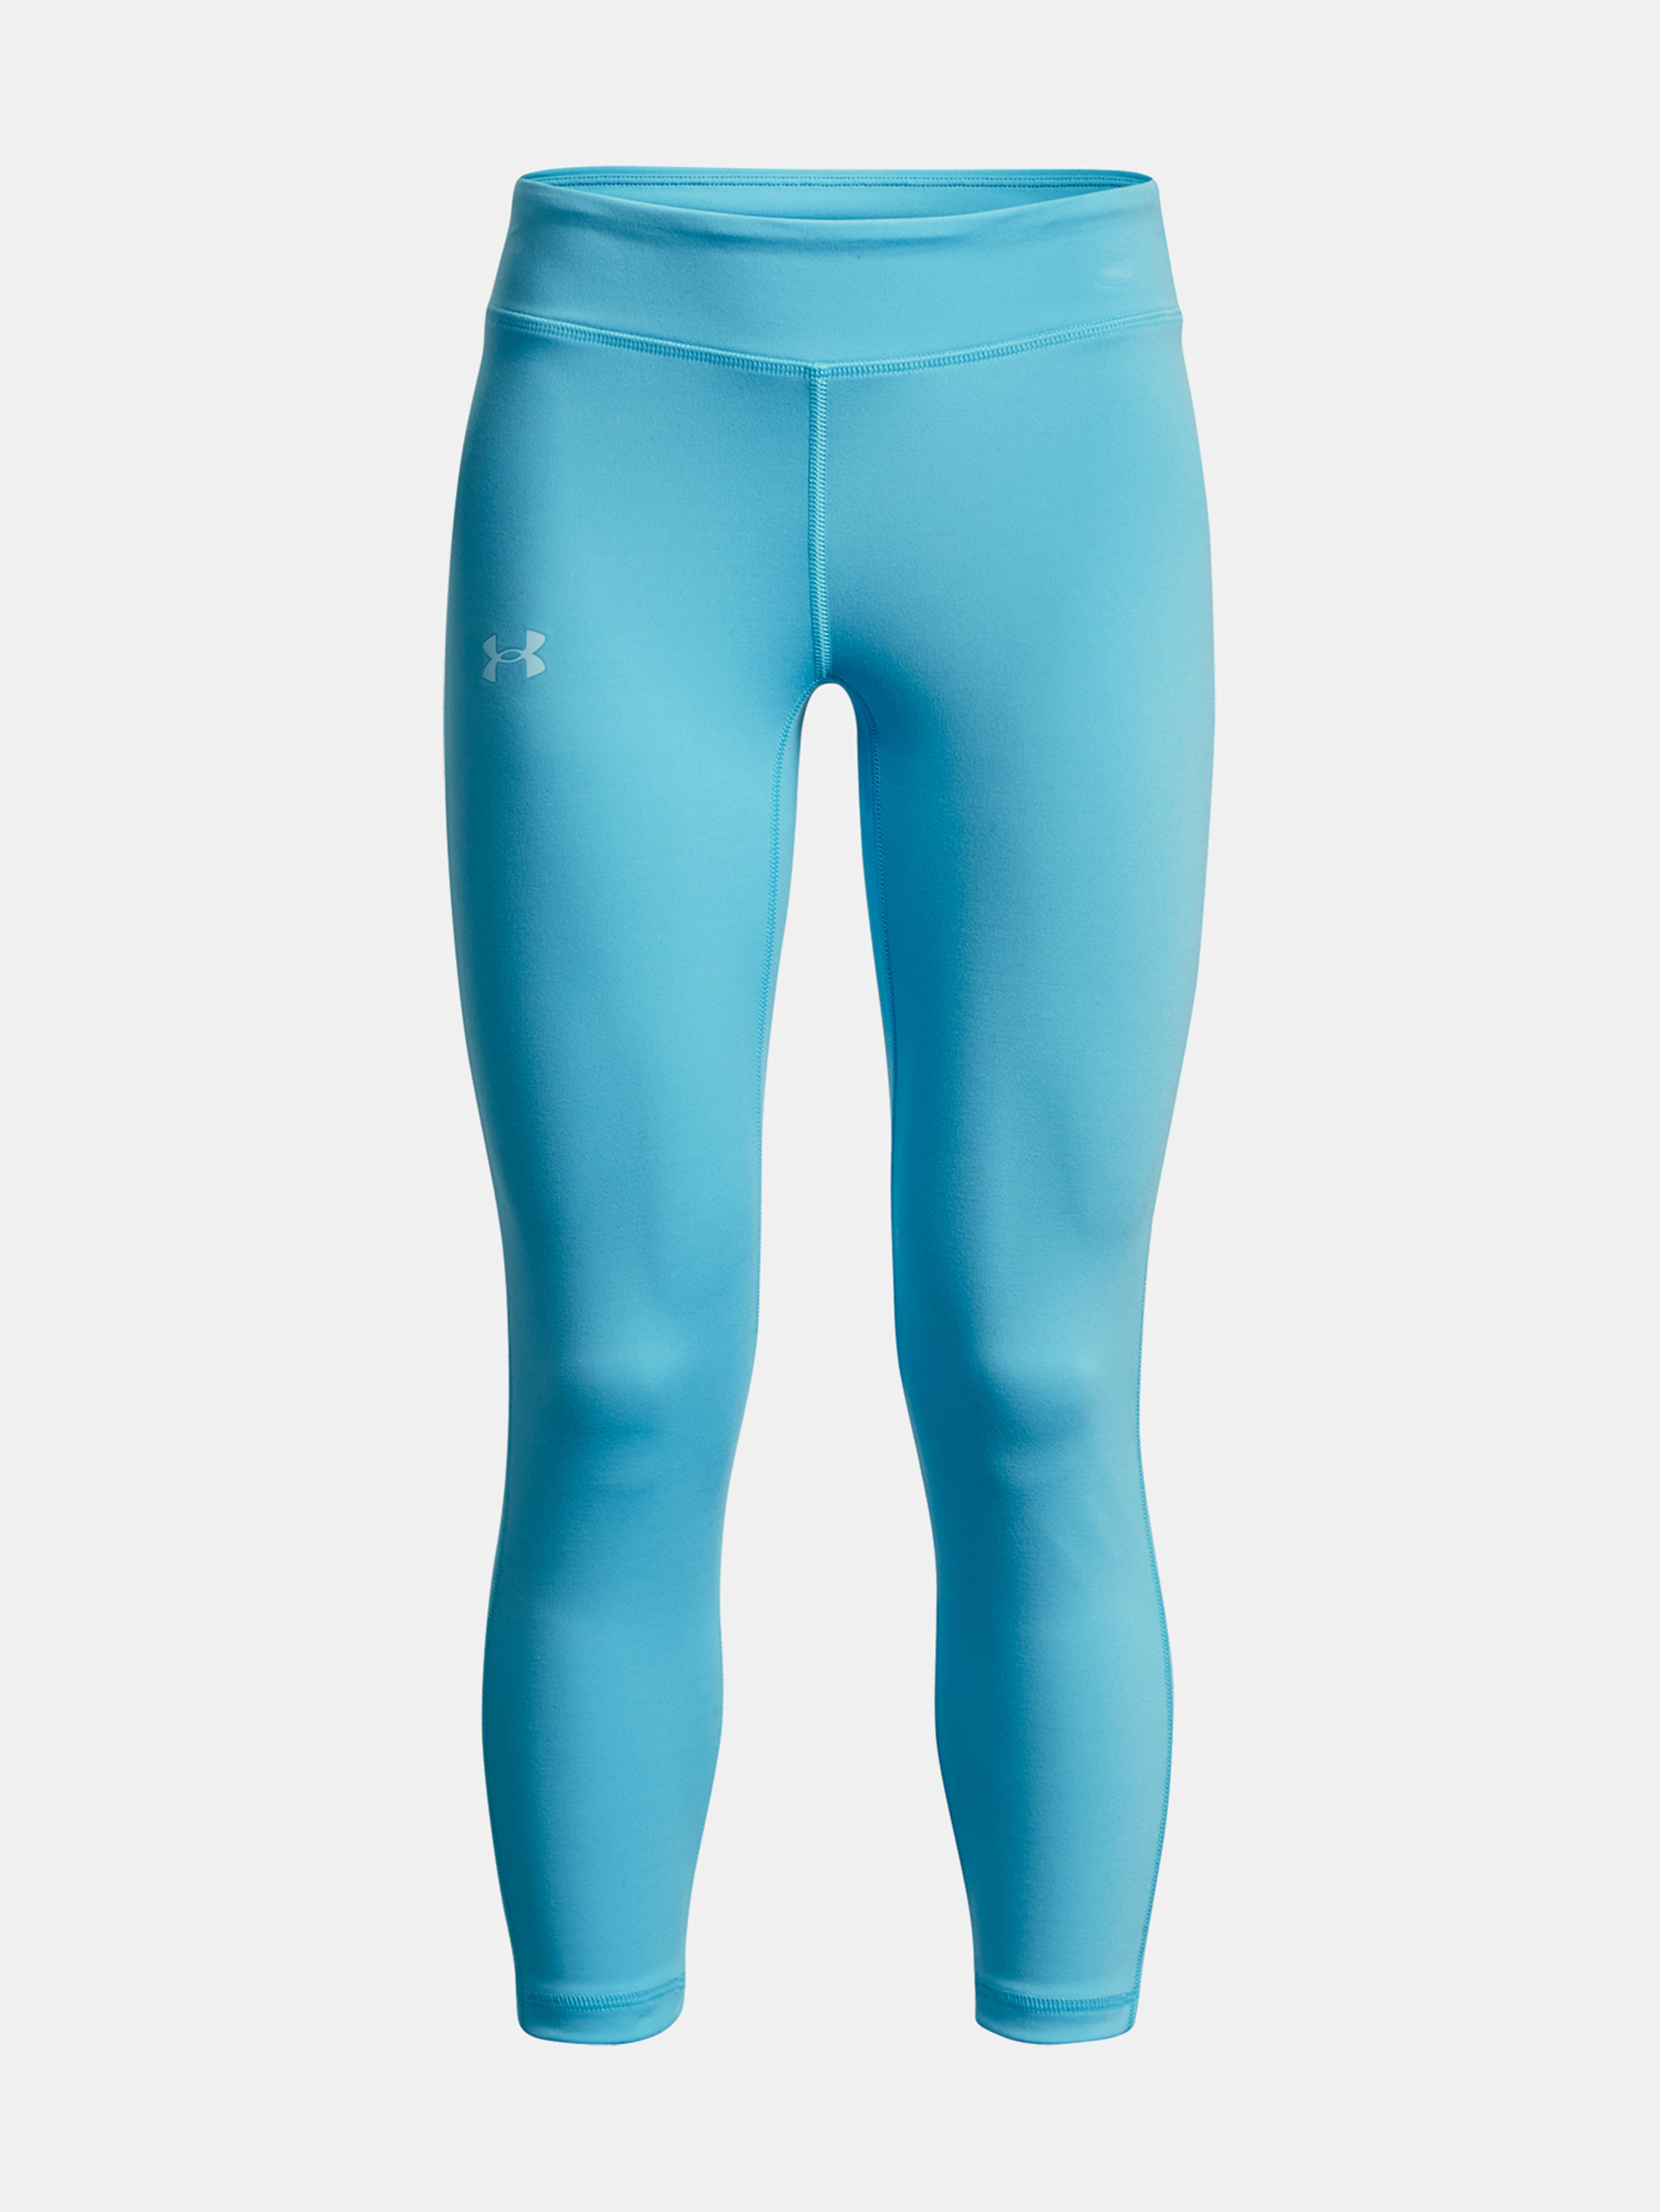 Under Armour Motion Solid Crop leggings